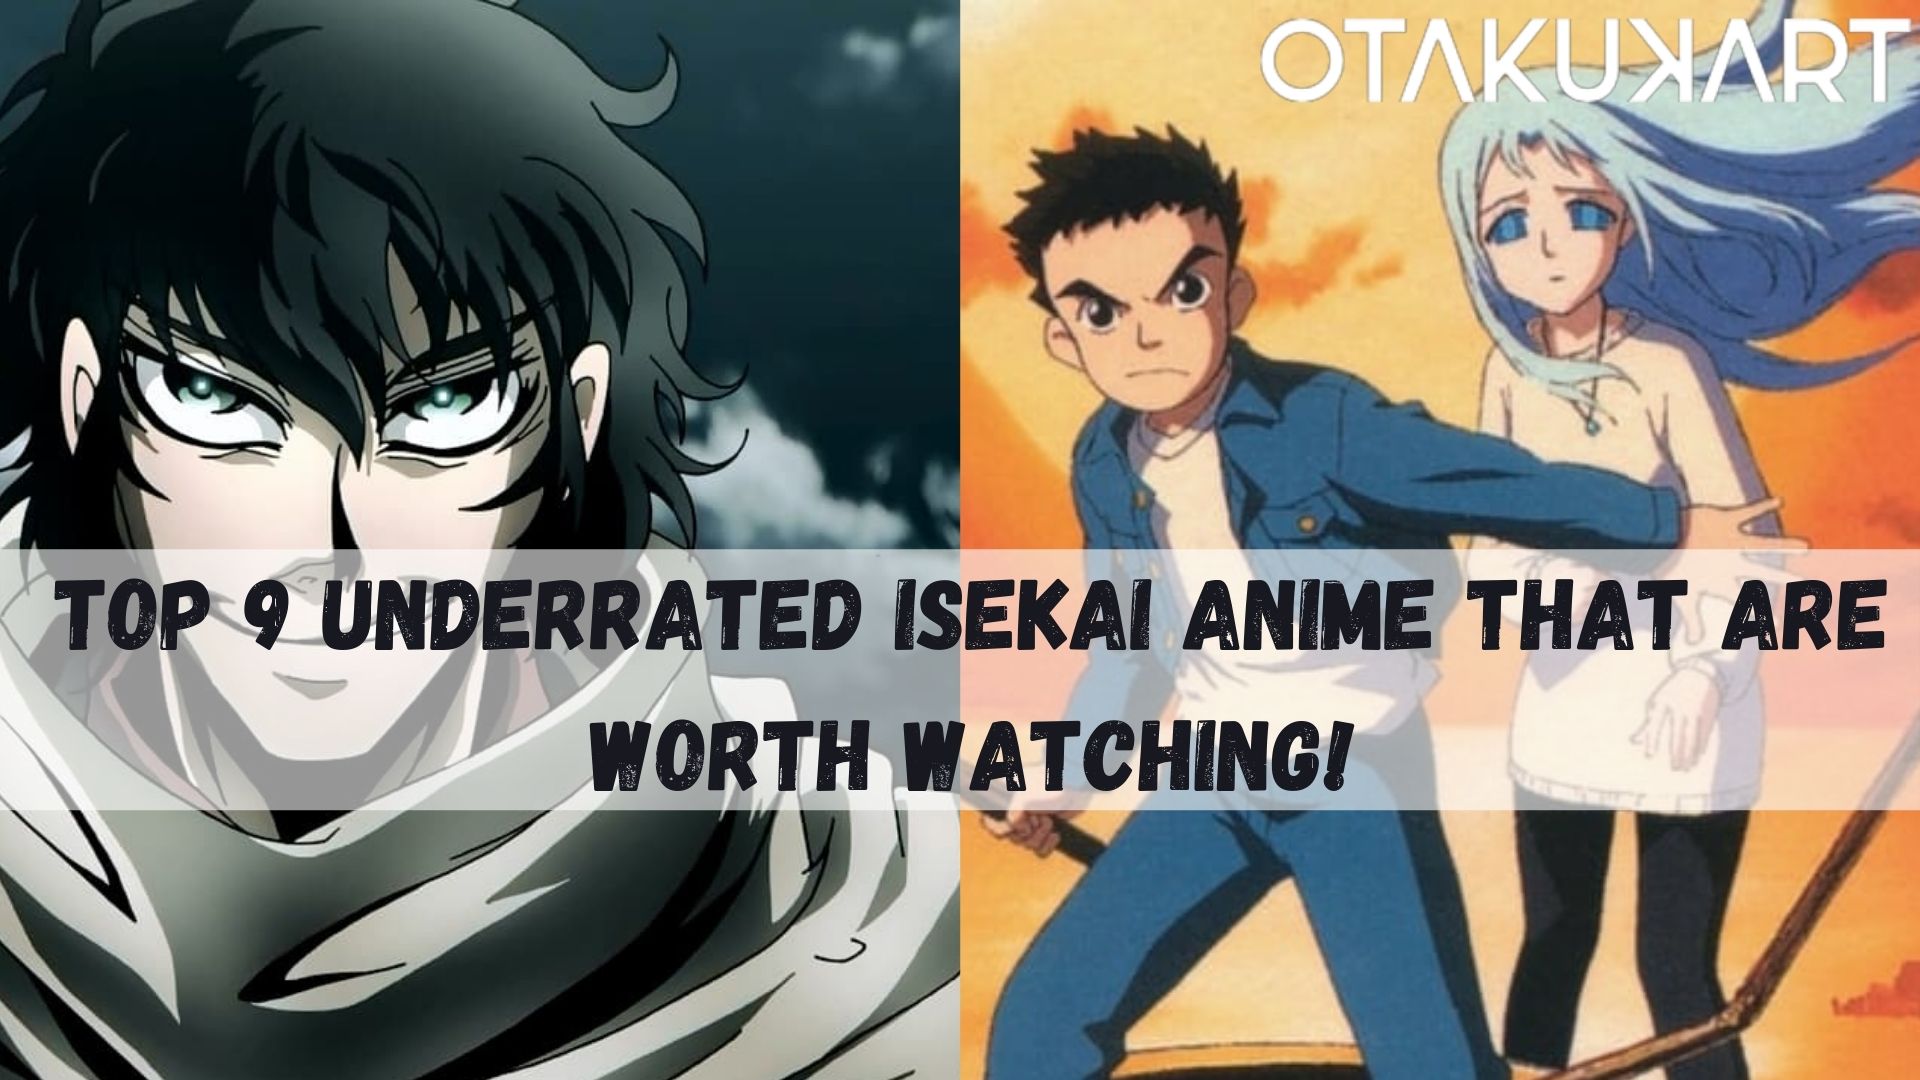 Top 9 Underrated Isekai Anime That You Should be watching. Watching!